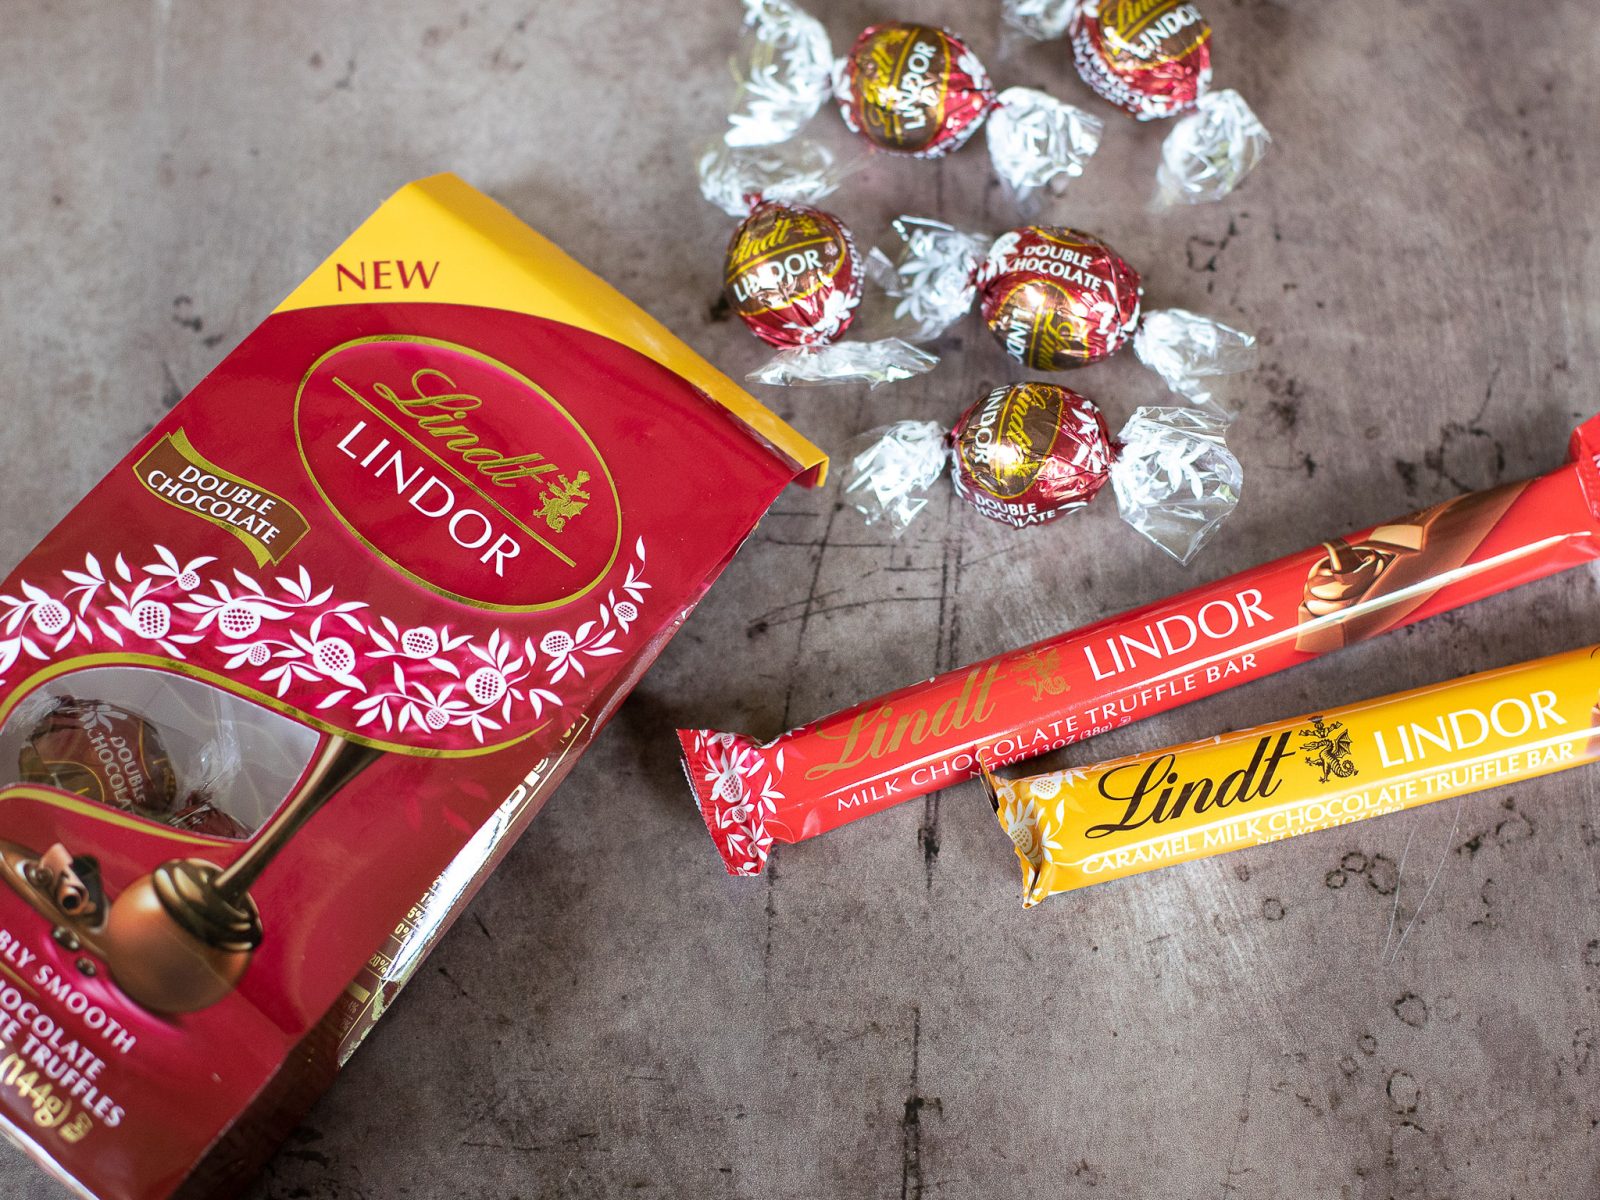 New Lindt Lindor Chocolate Coupons - Truffle Stick Just 94¢ At Publix on I Heart Publix 1